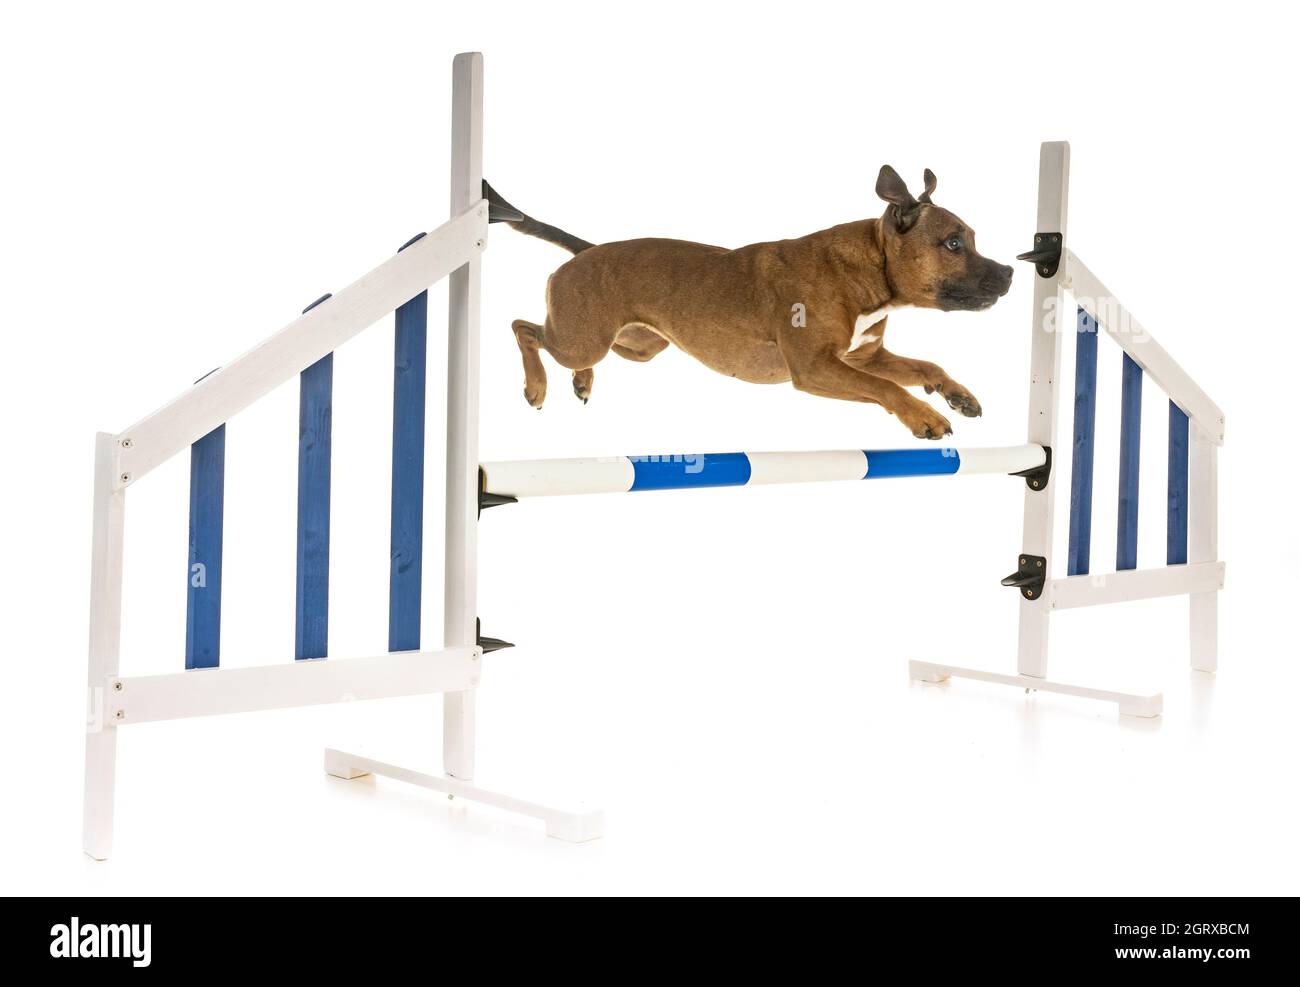 Dog Jumping Over Hurdle Against White Background Stock Photo